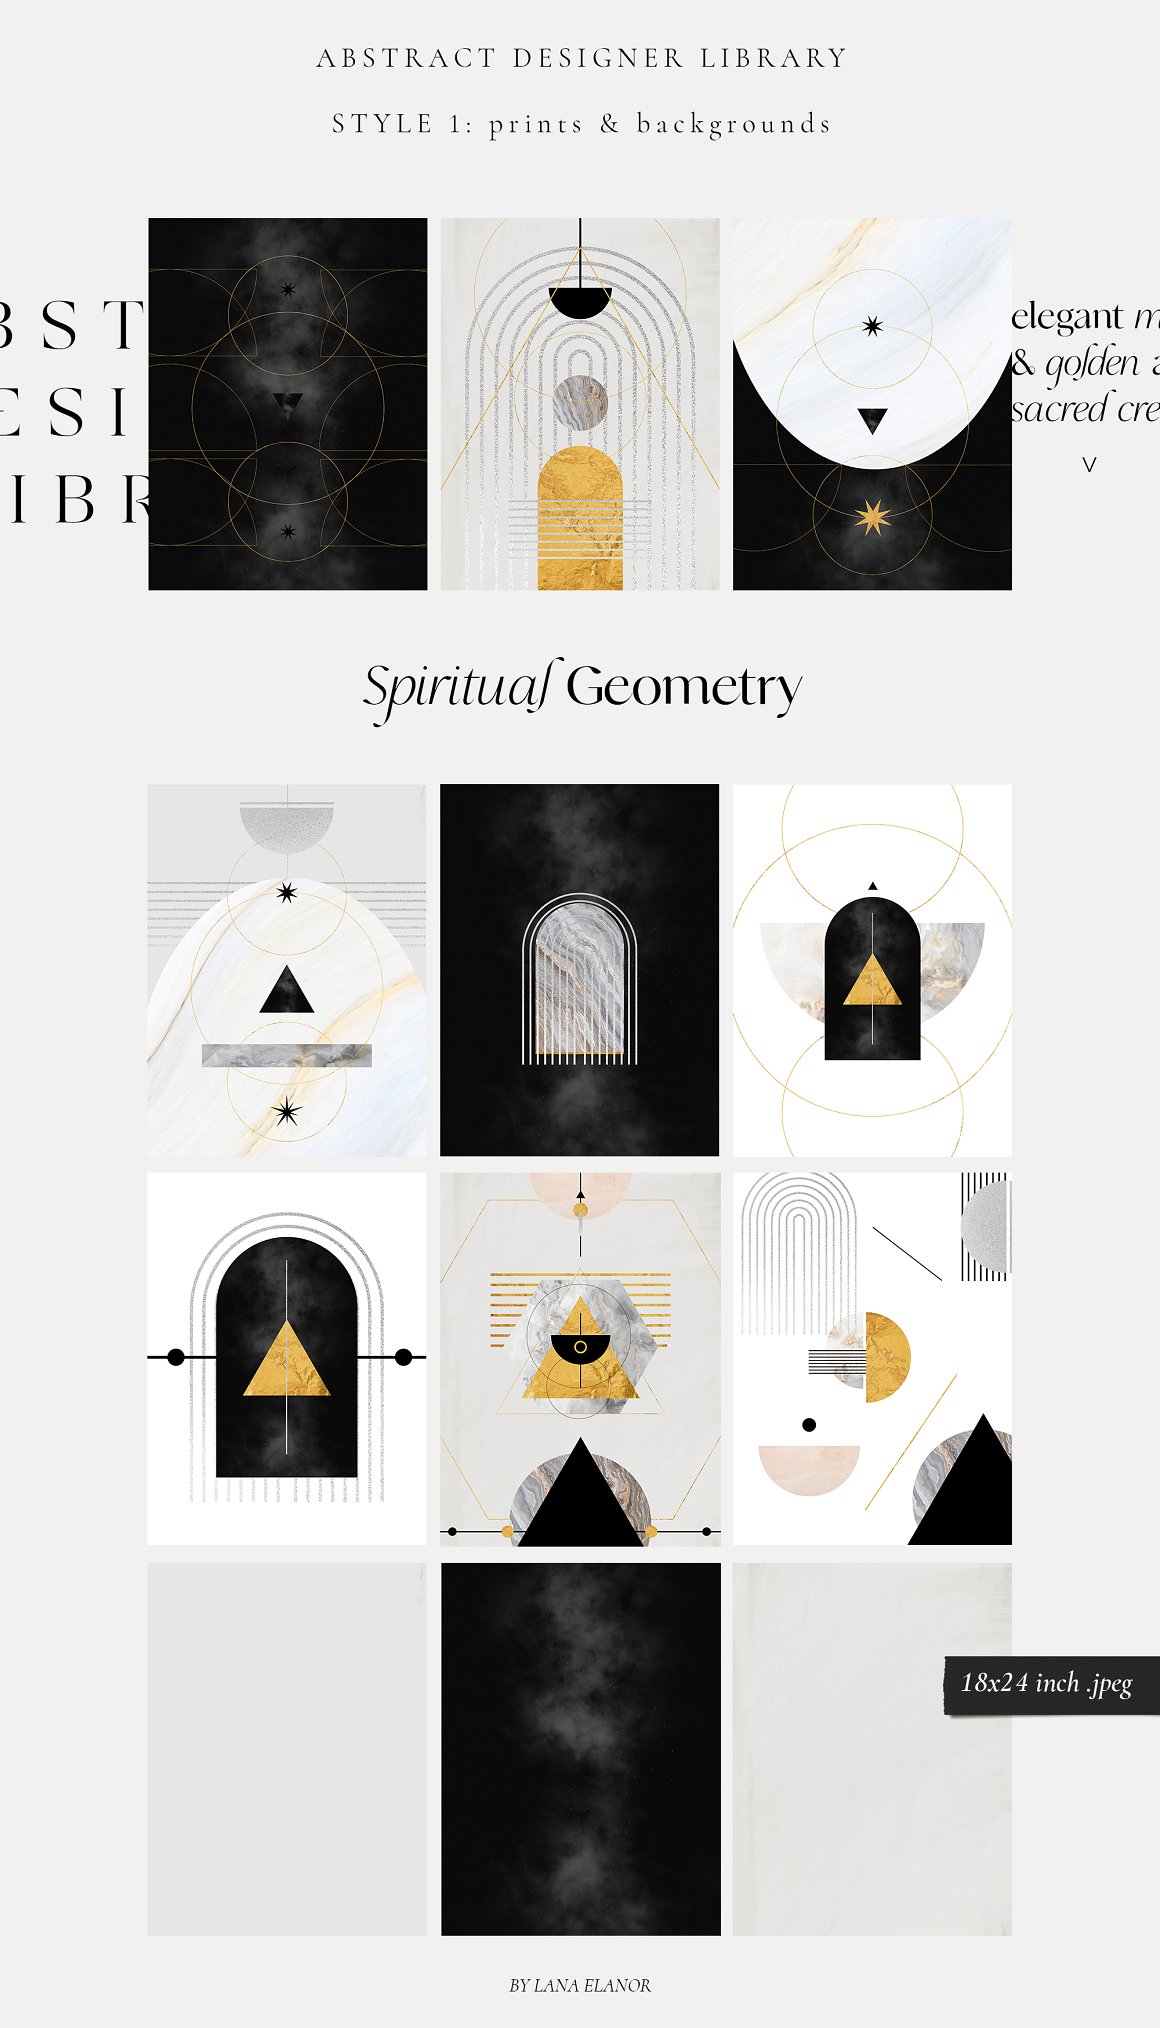 Spiritual geometry library on a gray background.